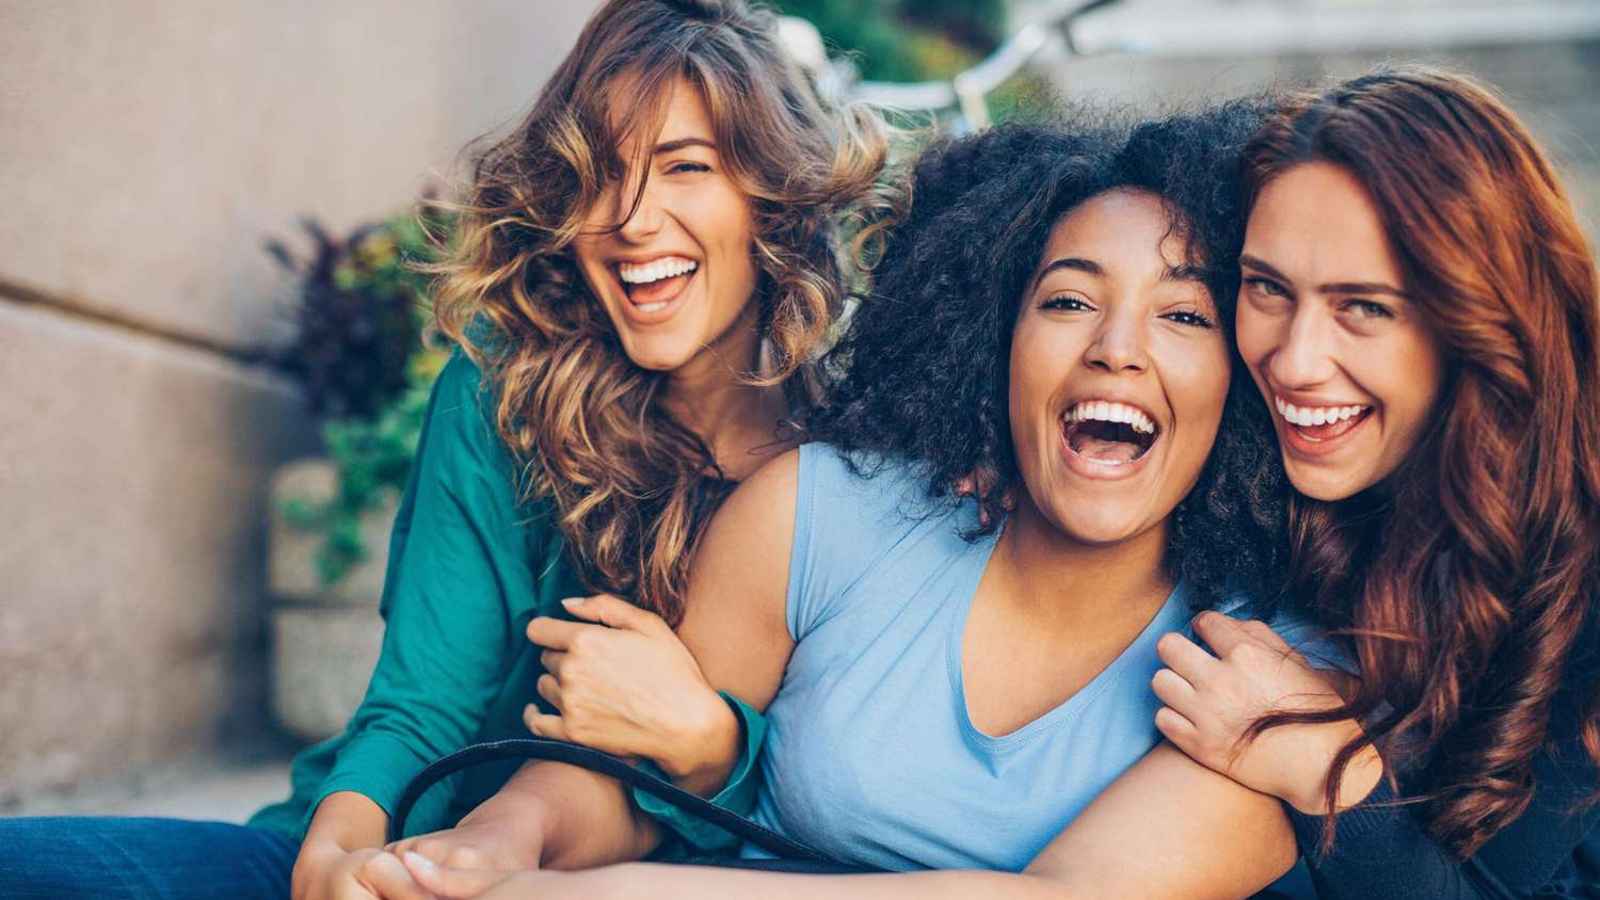 National Girlfriend Day 2023: Date, History, Facts about Female Friendship